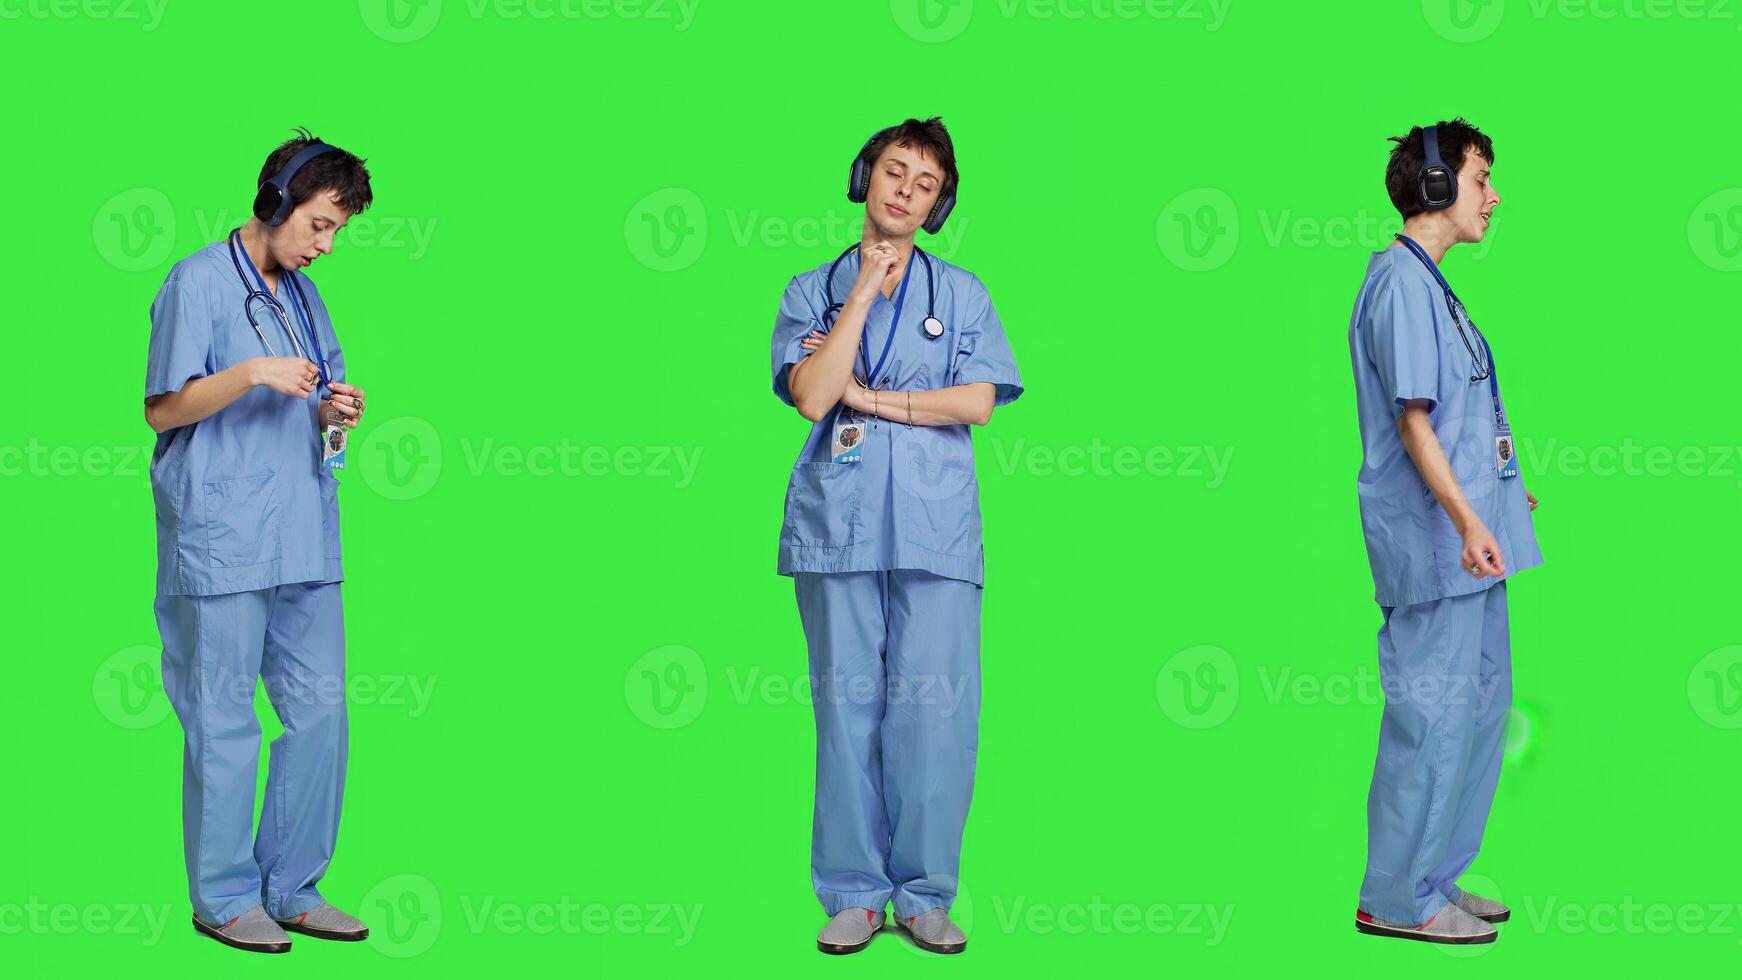 Cheerful health specialist listening to cool music on audio headset, dancing against greenscreen backdrop and having fun. Nurse enjoying songs an doing funny dance moves, leisure. Camera A. photo